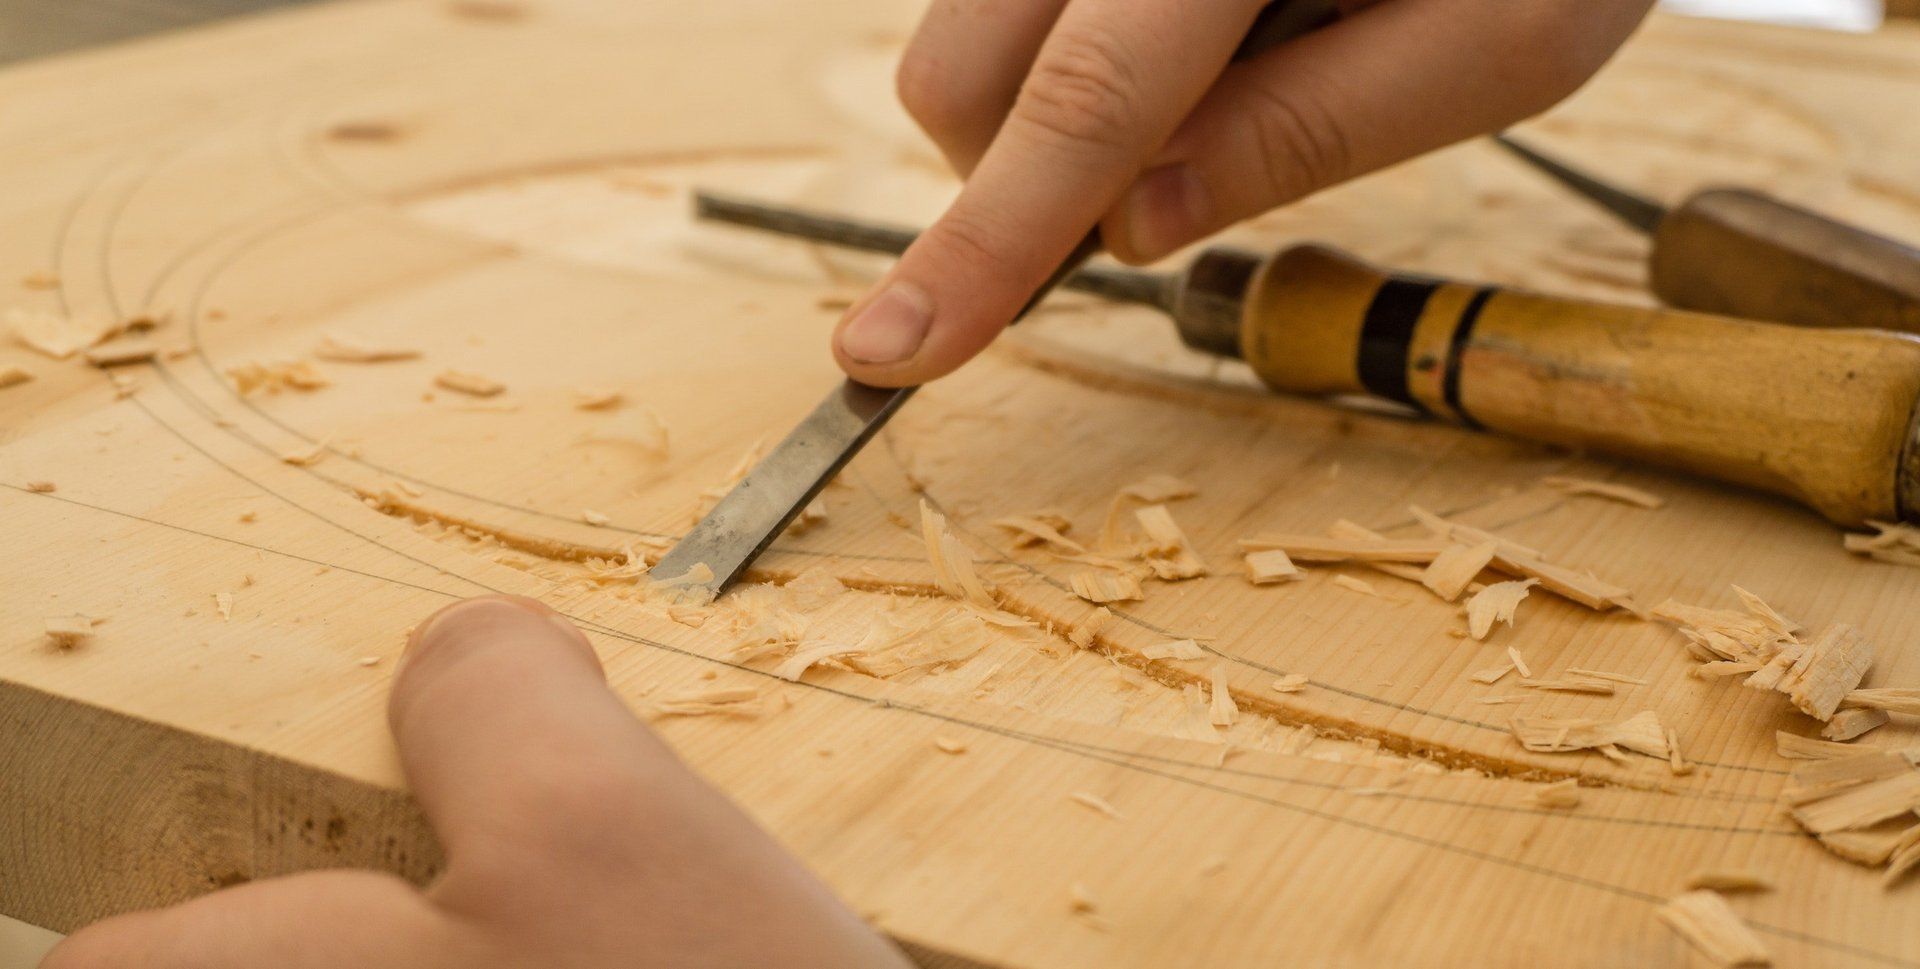 Hands carving into wood with woodworking tools 